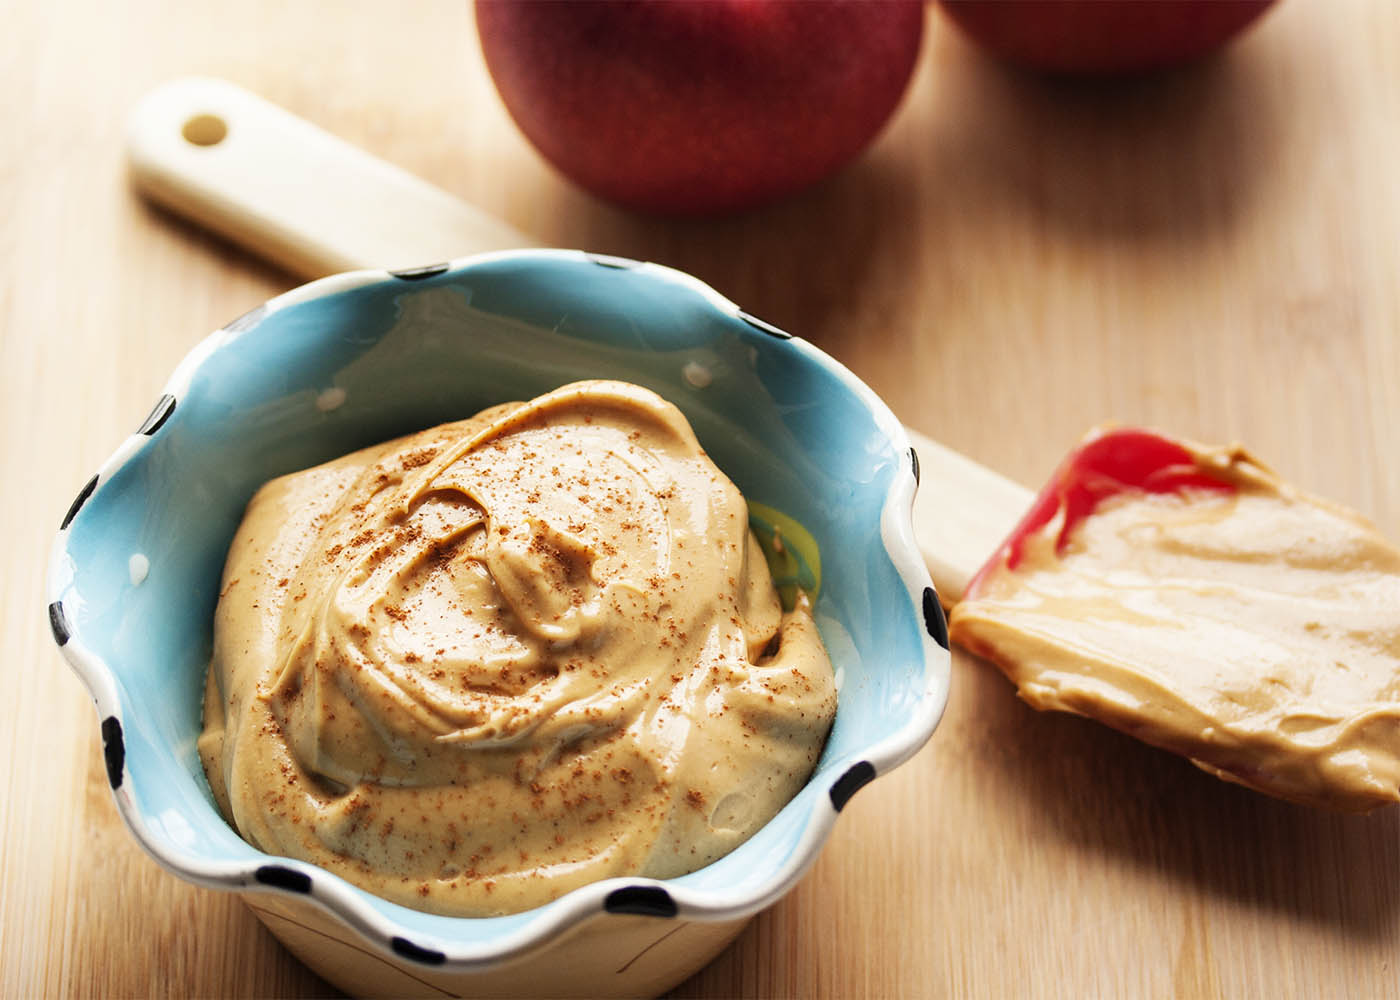 Apple Cider Dip - This cream cheese apple cider dip is packed full of intense cider flavor that will have you coming back for more. | justalittlebitofbacon.com